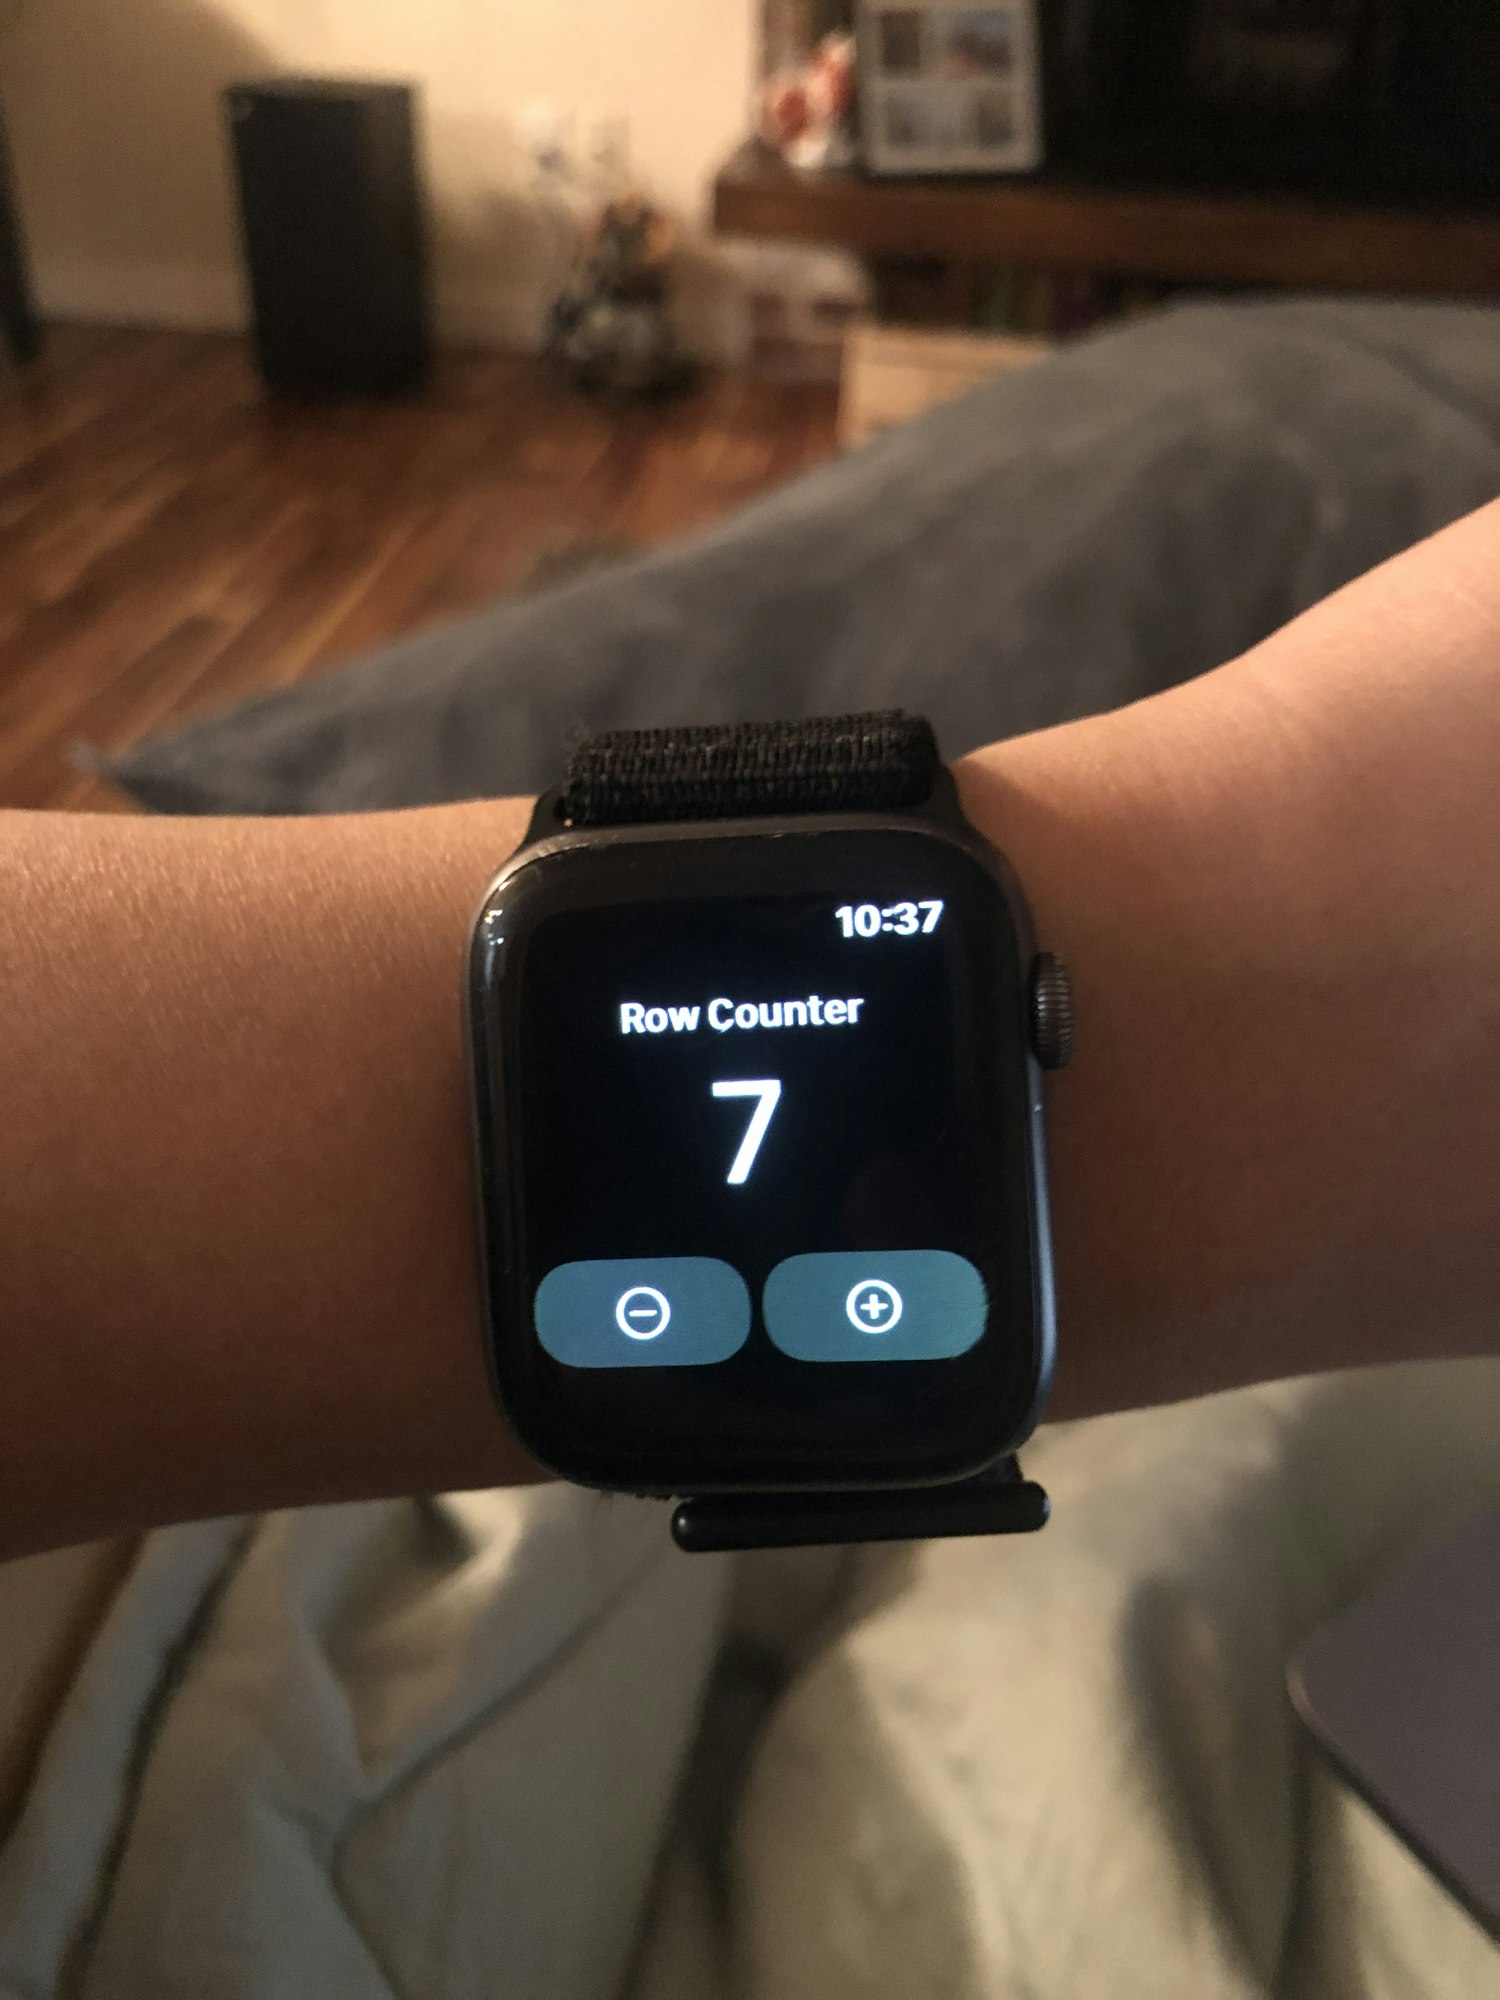 Apple Watch screen of version 1 ArisaKnits Row Counter app with a minus and plus button to increase or decrease the number of rows 